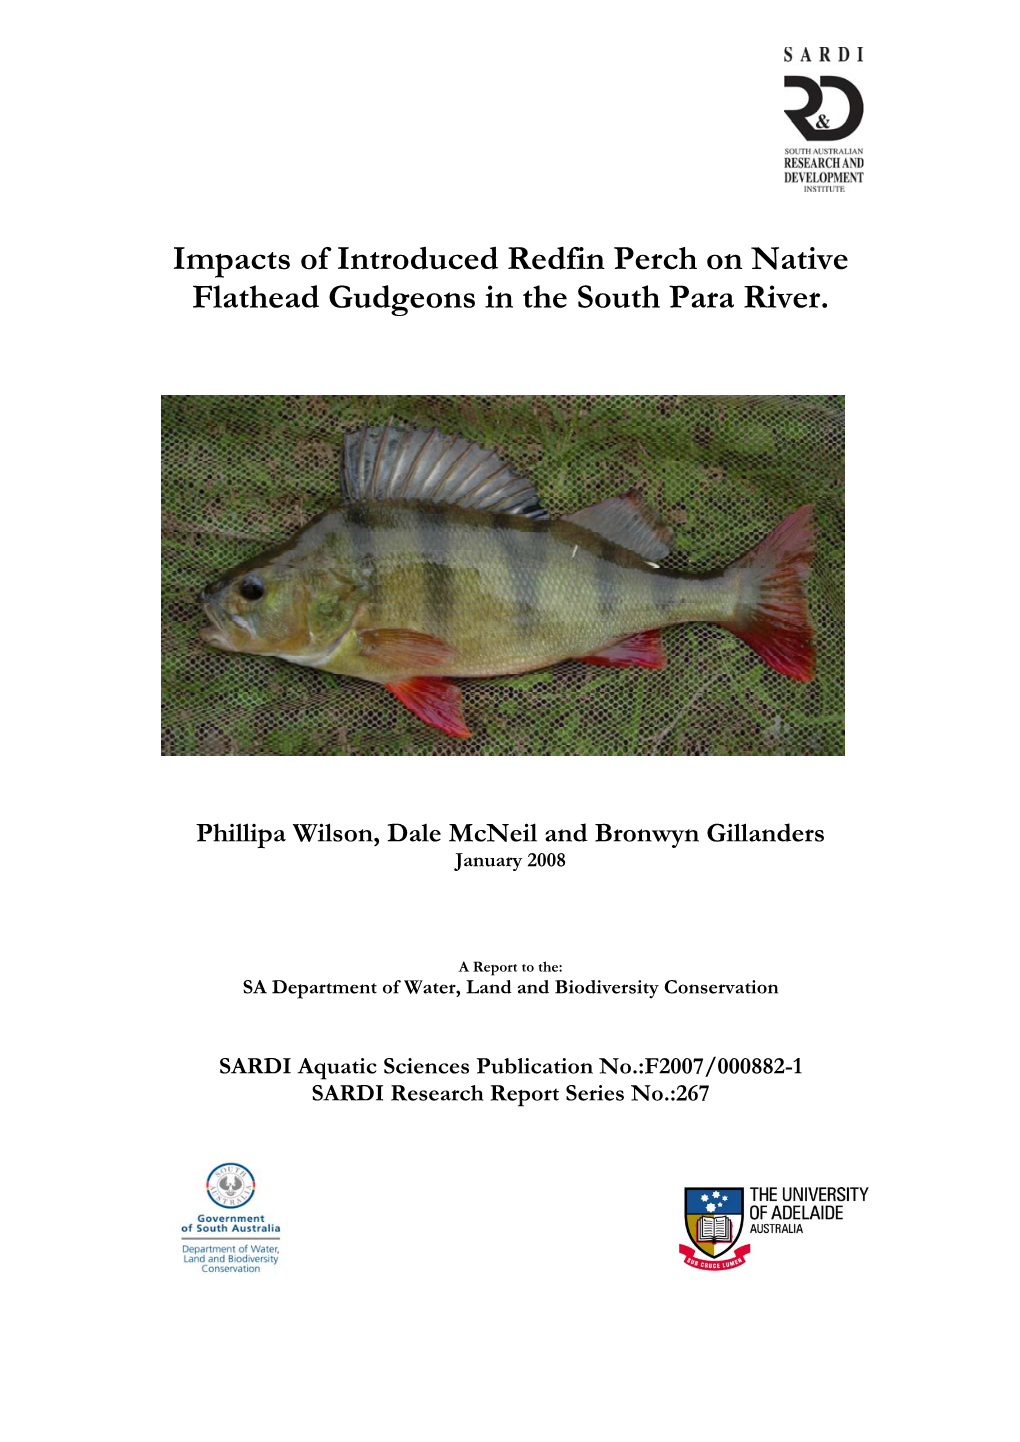 Impacts of Introduced Redfin Perch on Native Flathead Gudgeons in the South Para River